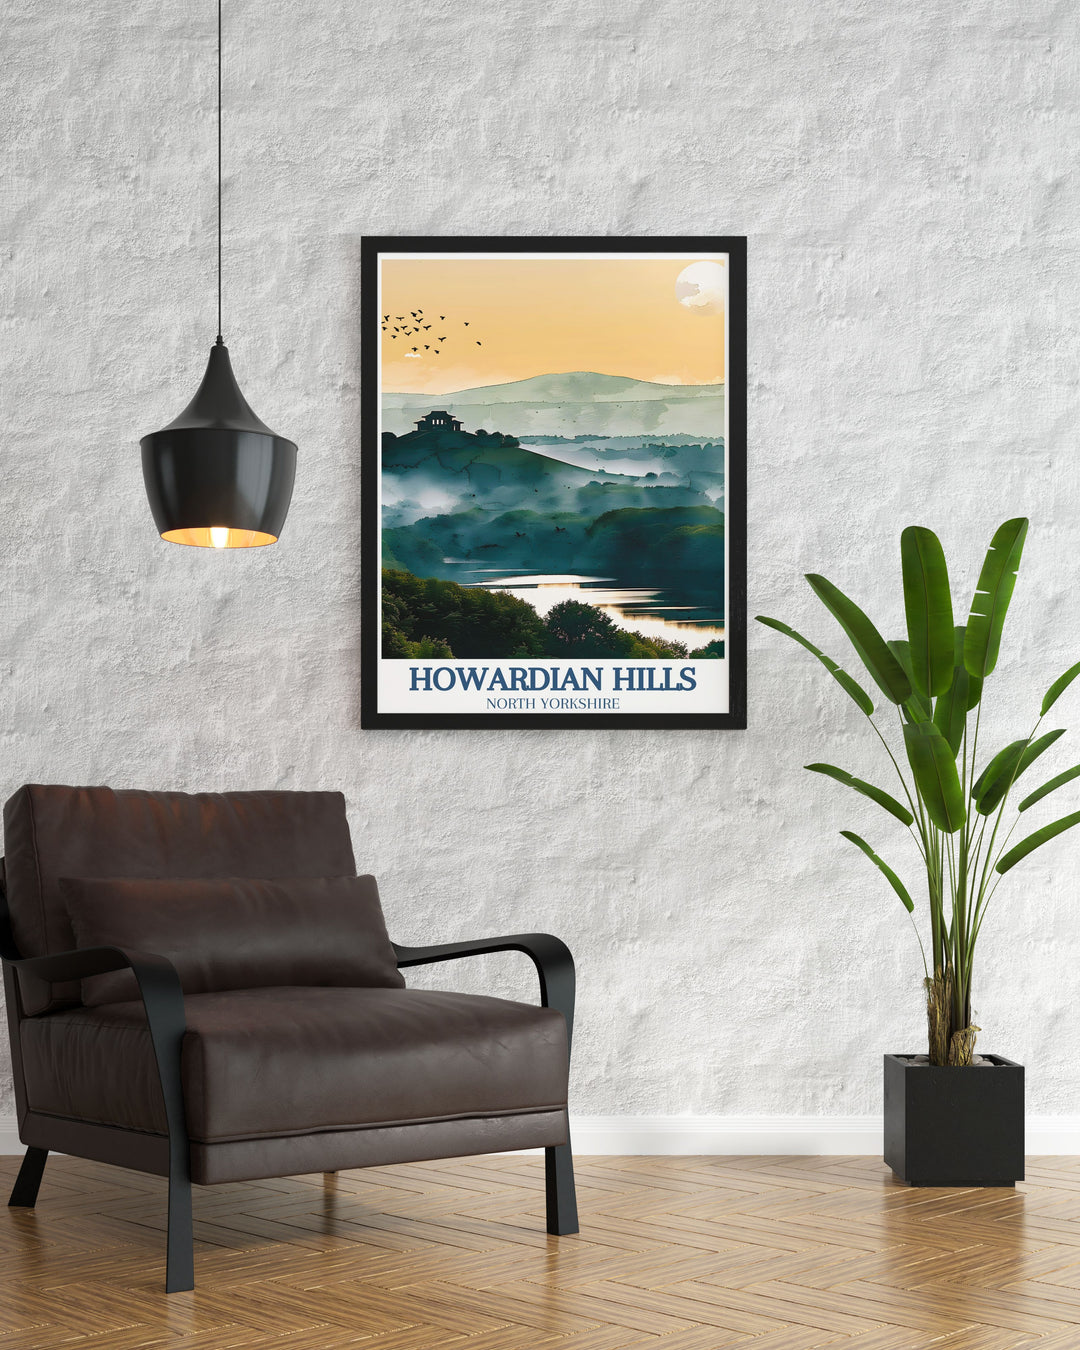 A vibrant fine art print of the Howardian Hills, capturing the rolling hills and lush greenery of North Yorkshire. This piece celebrates the natural beauty and tranquility of the countryside, making it a perfect addition to your home decor.